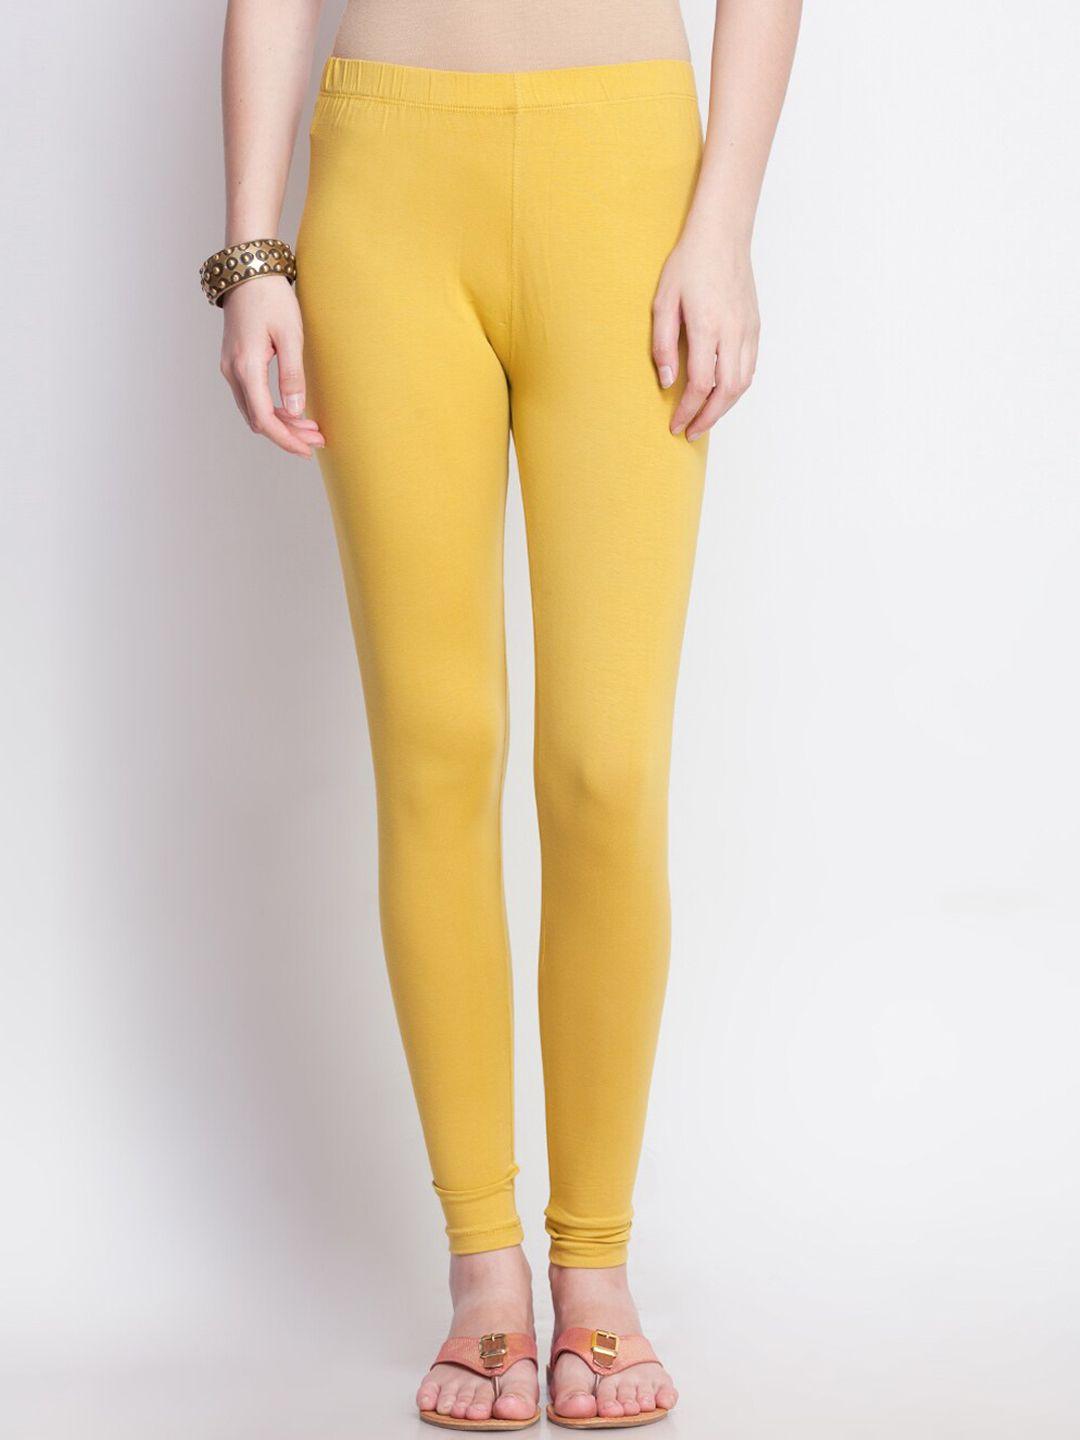 dollar missy women gold colored cotton slim fit ankle length leggings